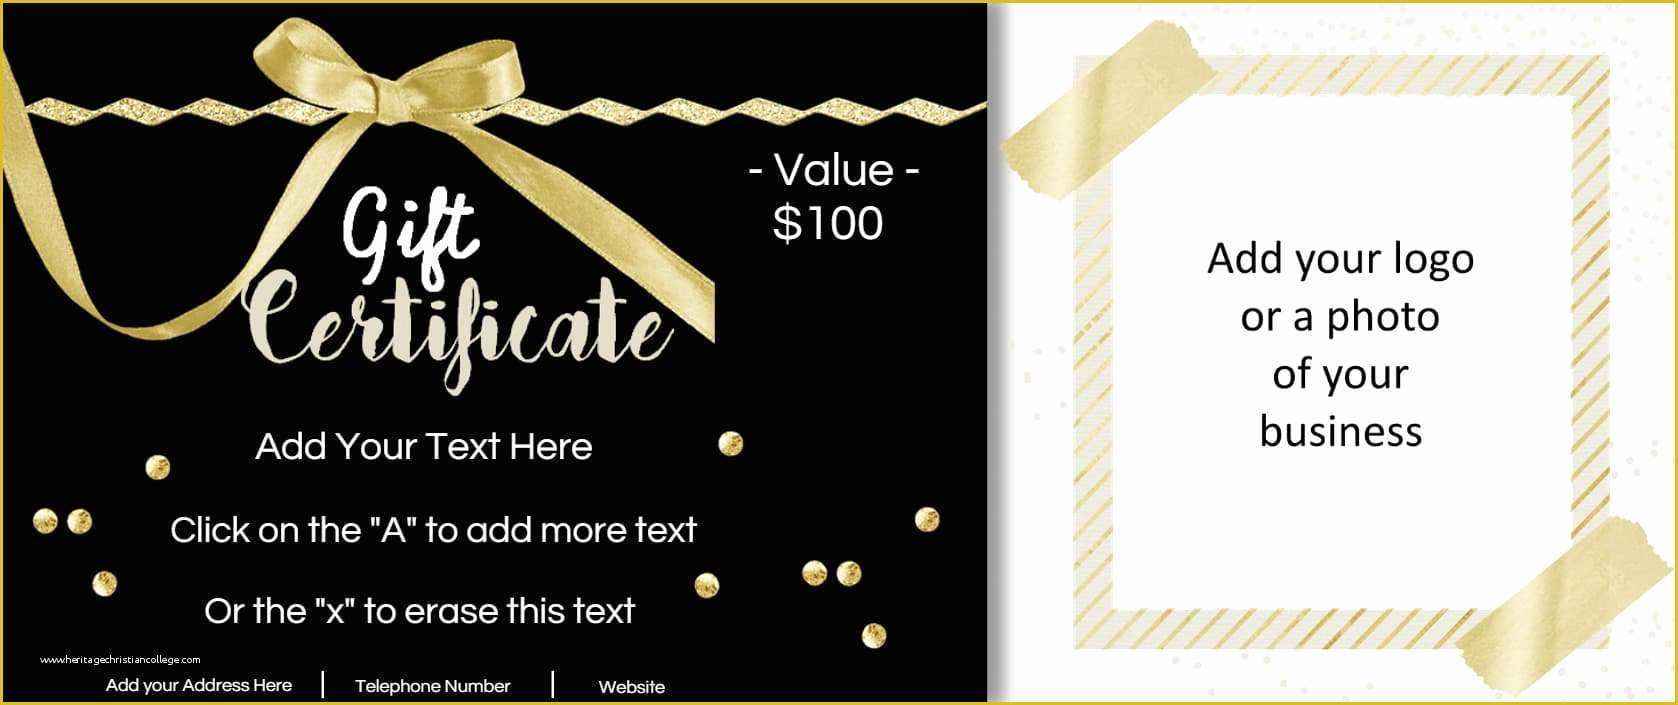 Gift Certificate Template Free Of Gift Certificate Template with Logo